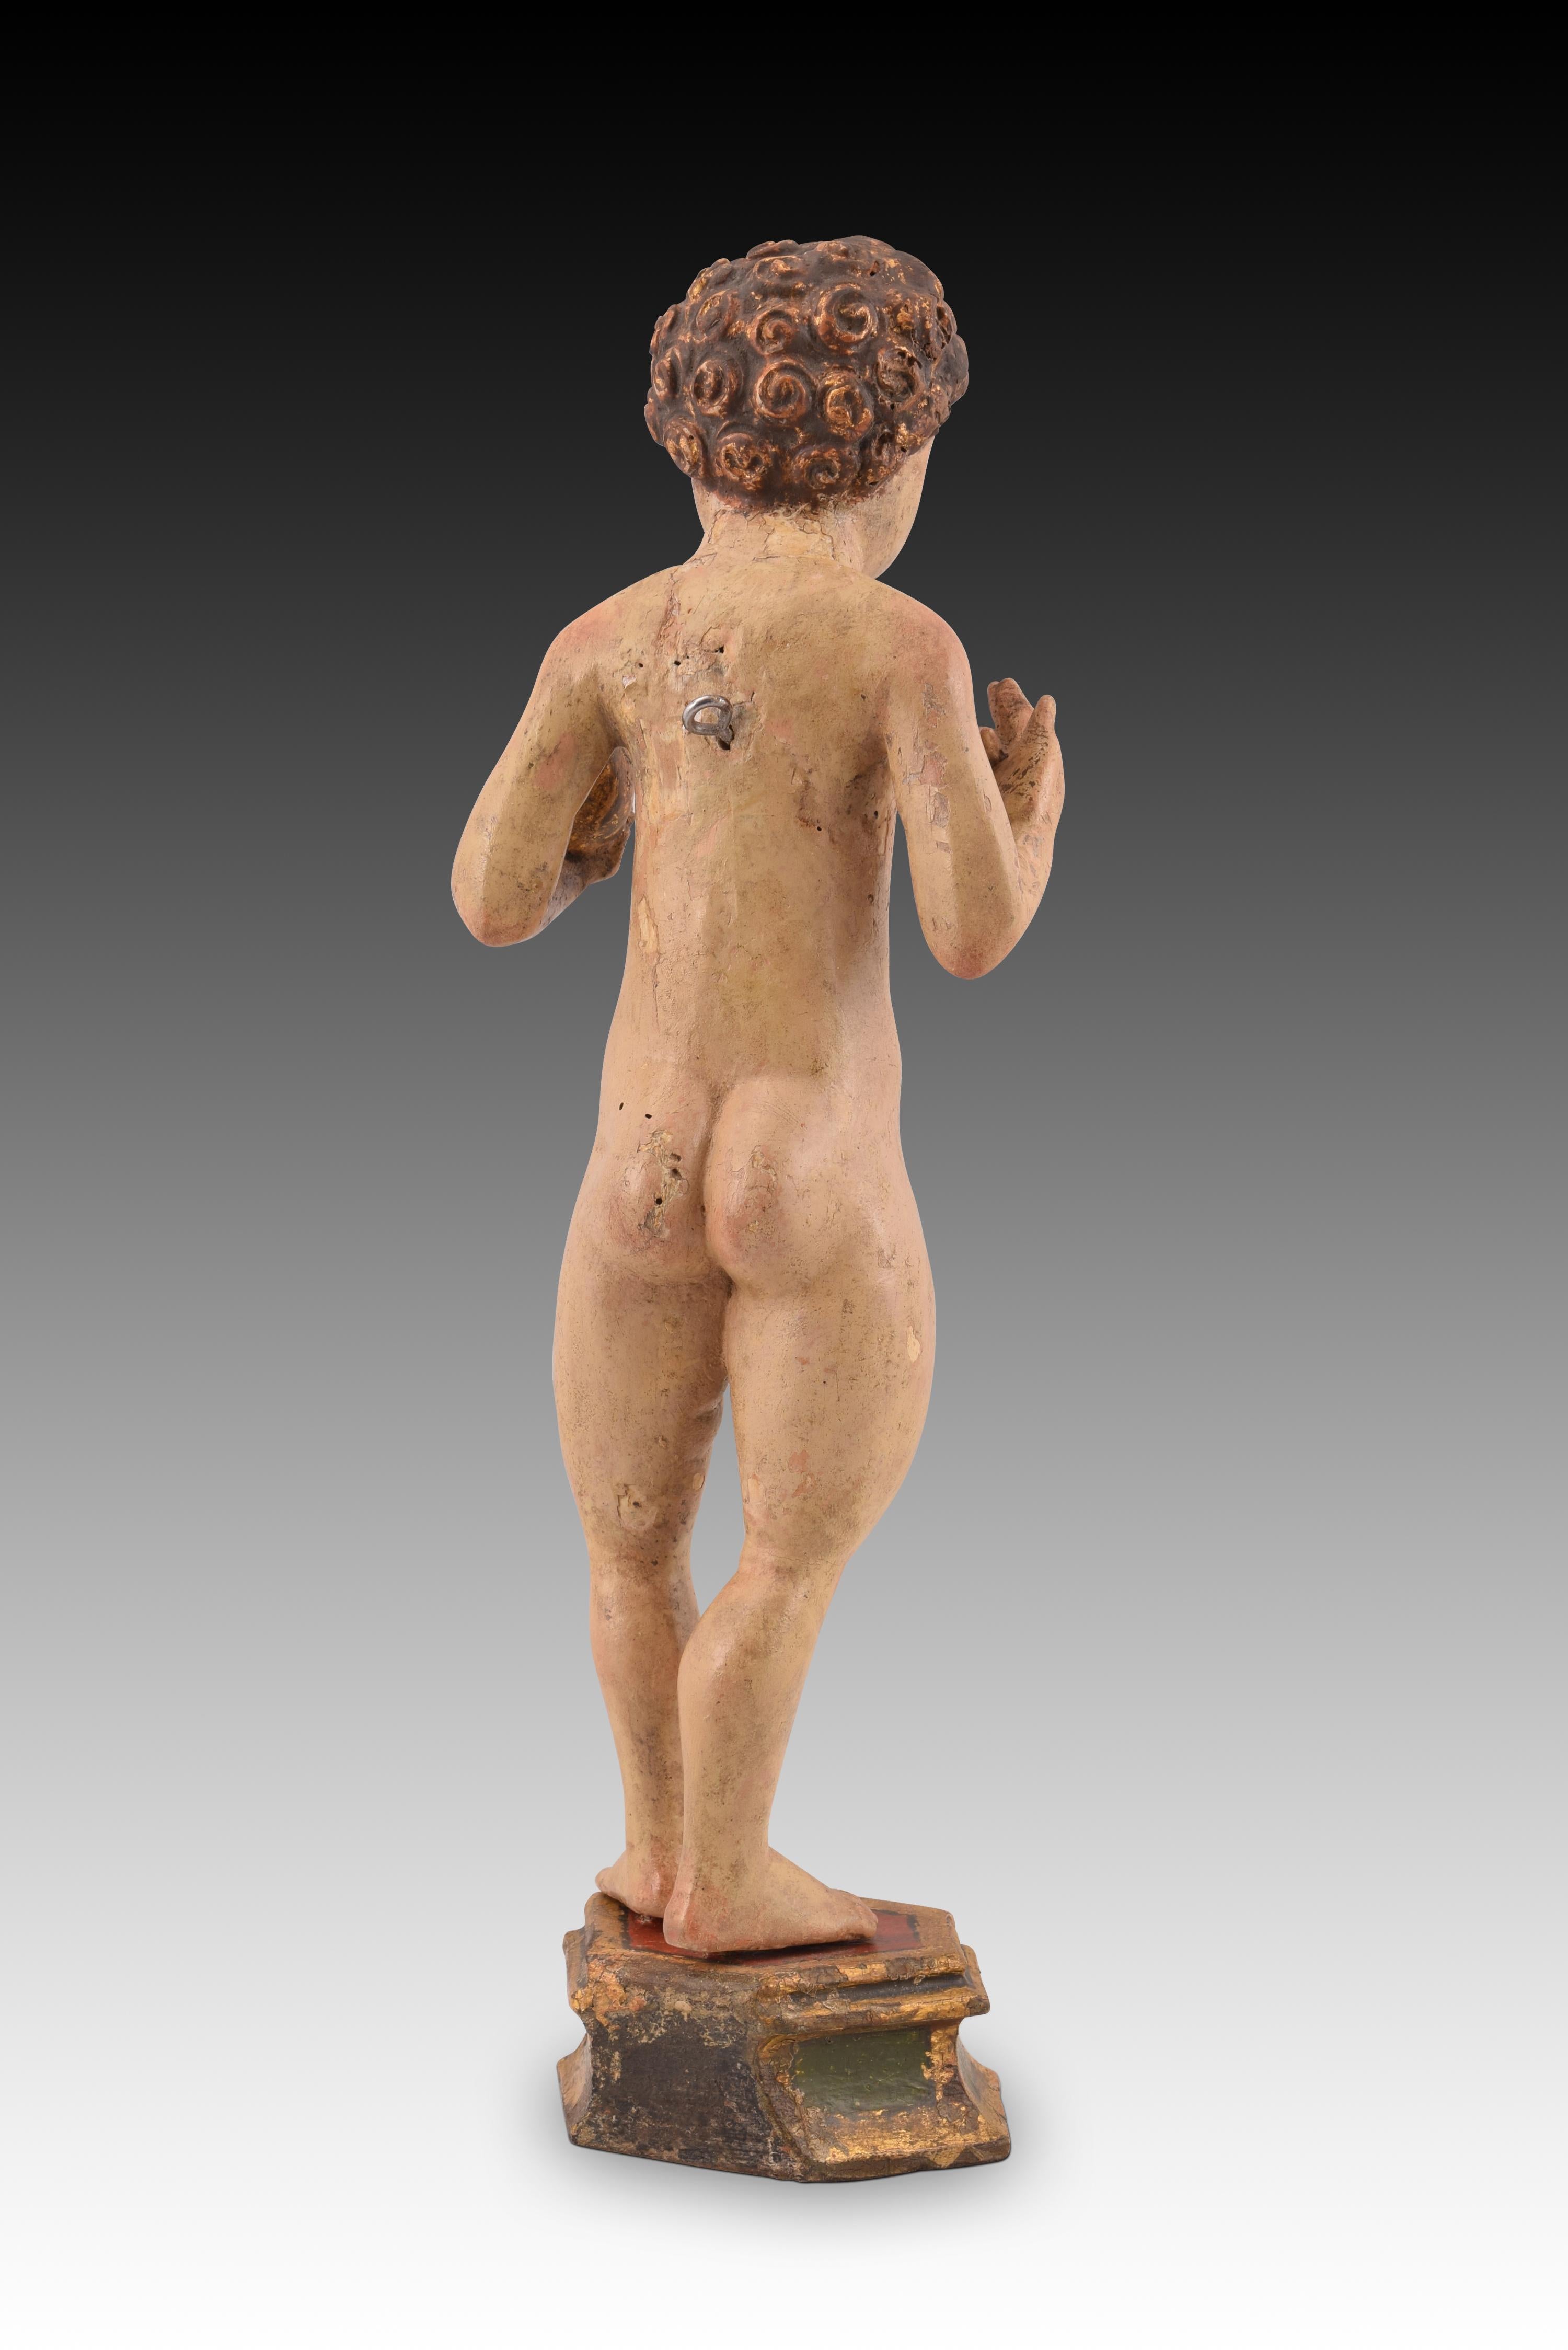 Belgian Child Jesus. Carved and polychrome wood. Flemish school, ca first half 16th c. For Sale